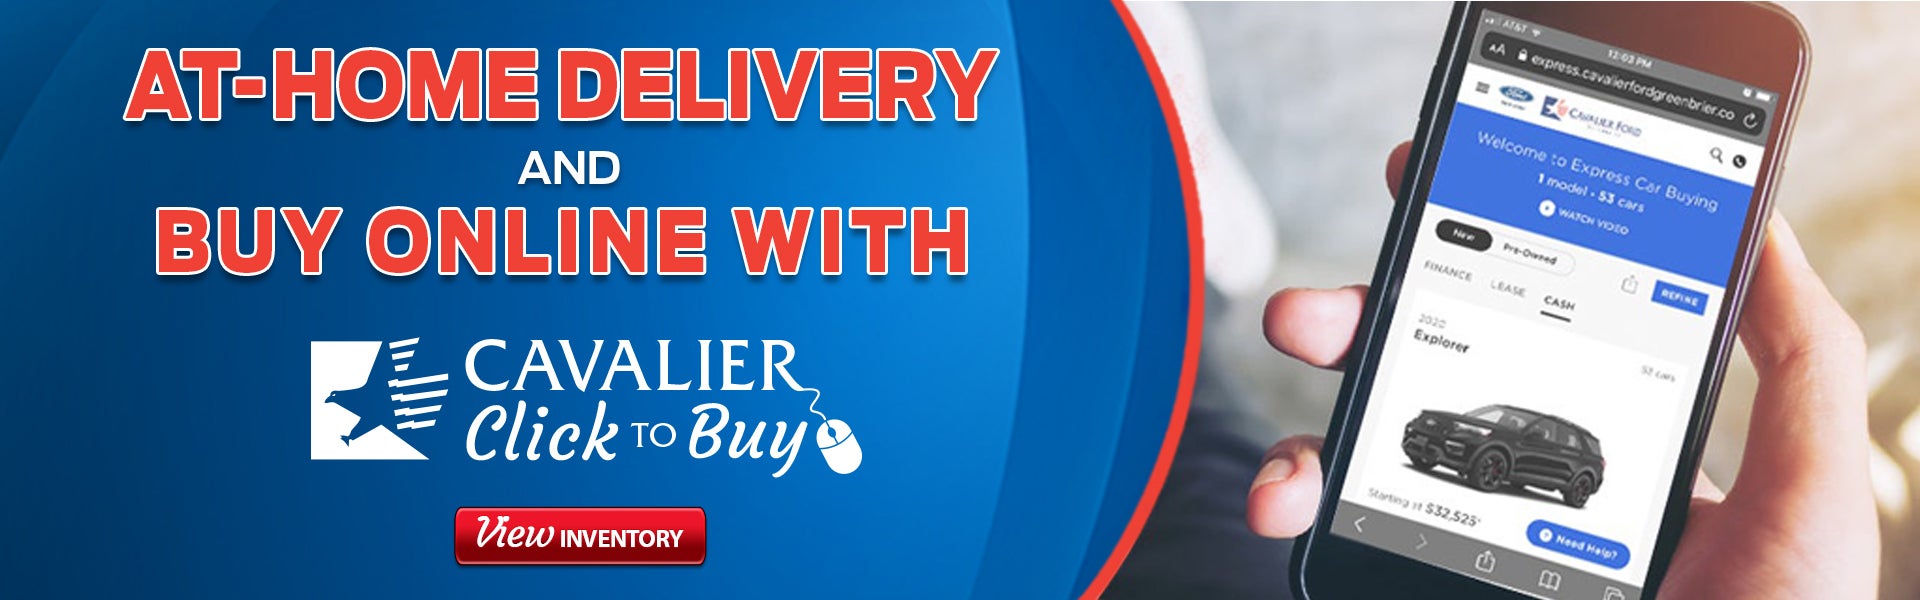 At-Home Delivery & Buy Online